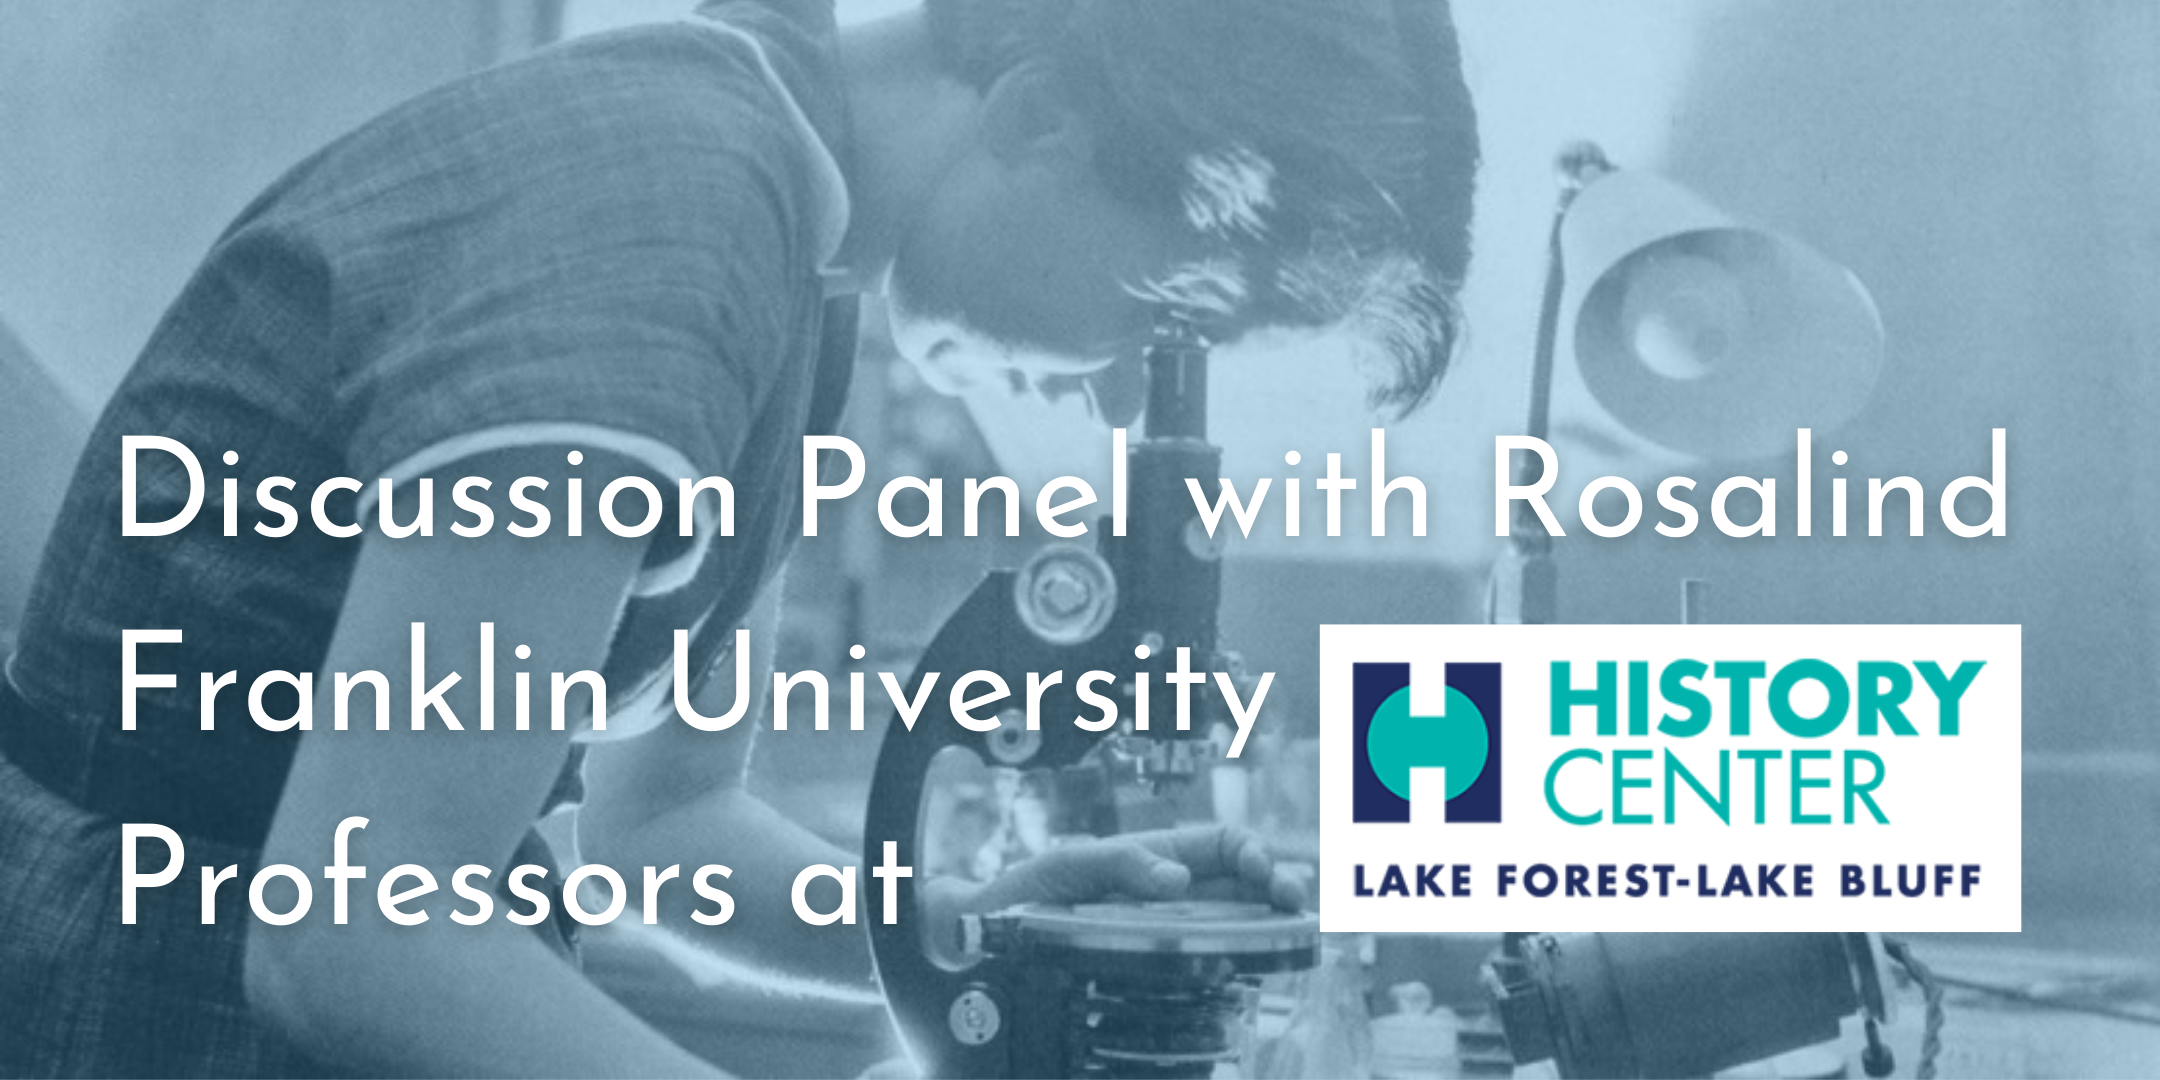 image of "Discussion Panel with Rosalind Franklin University Professors"